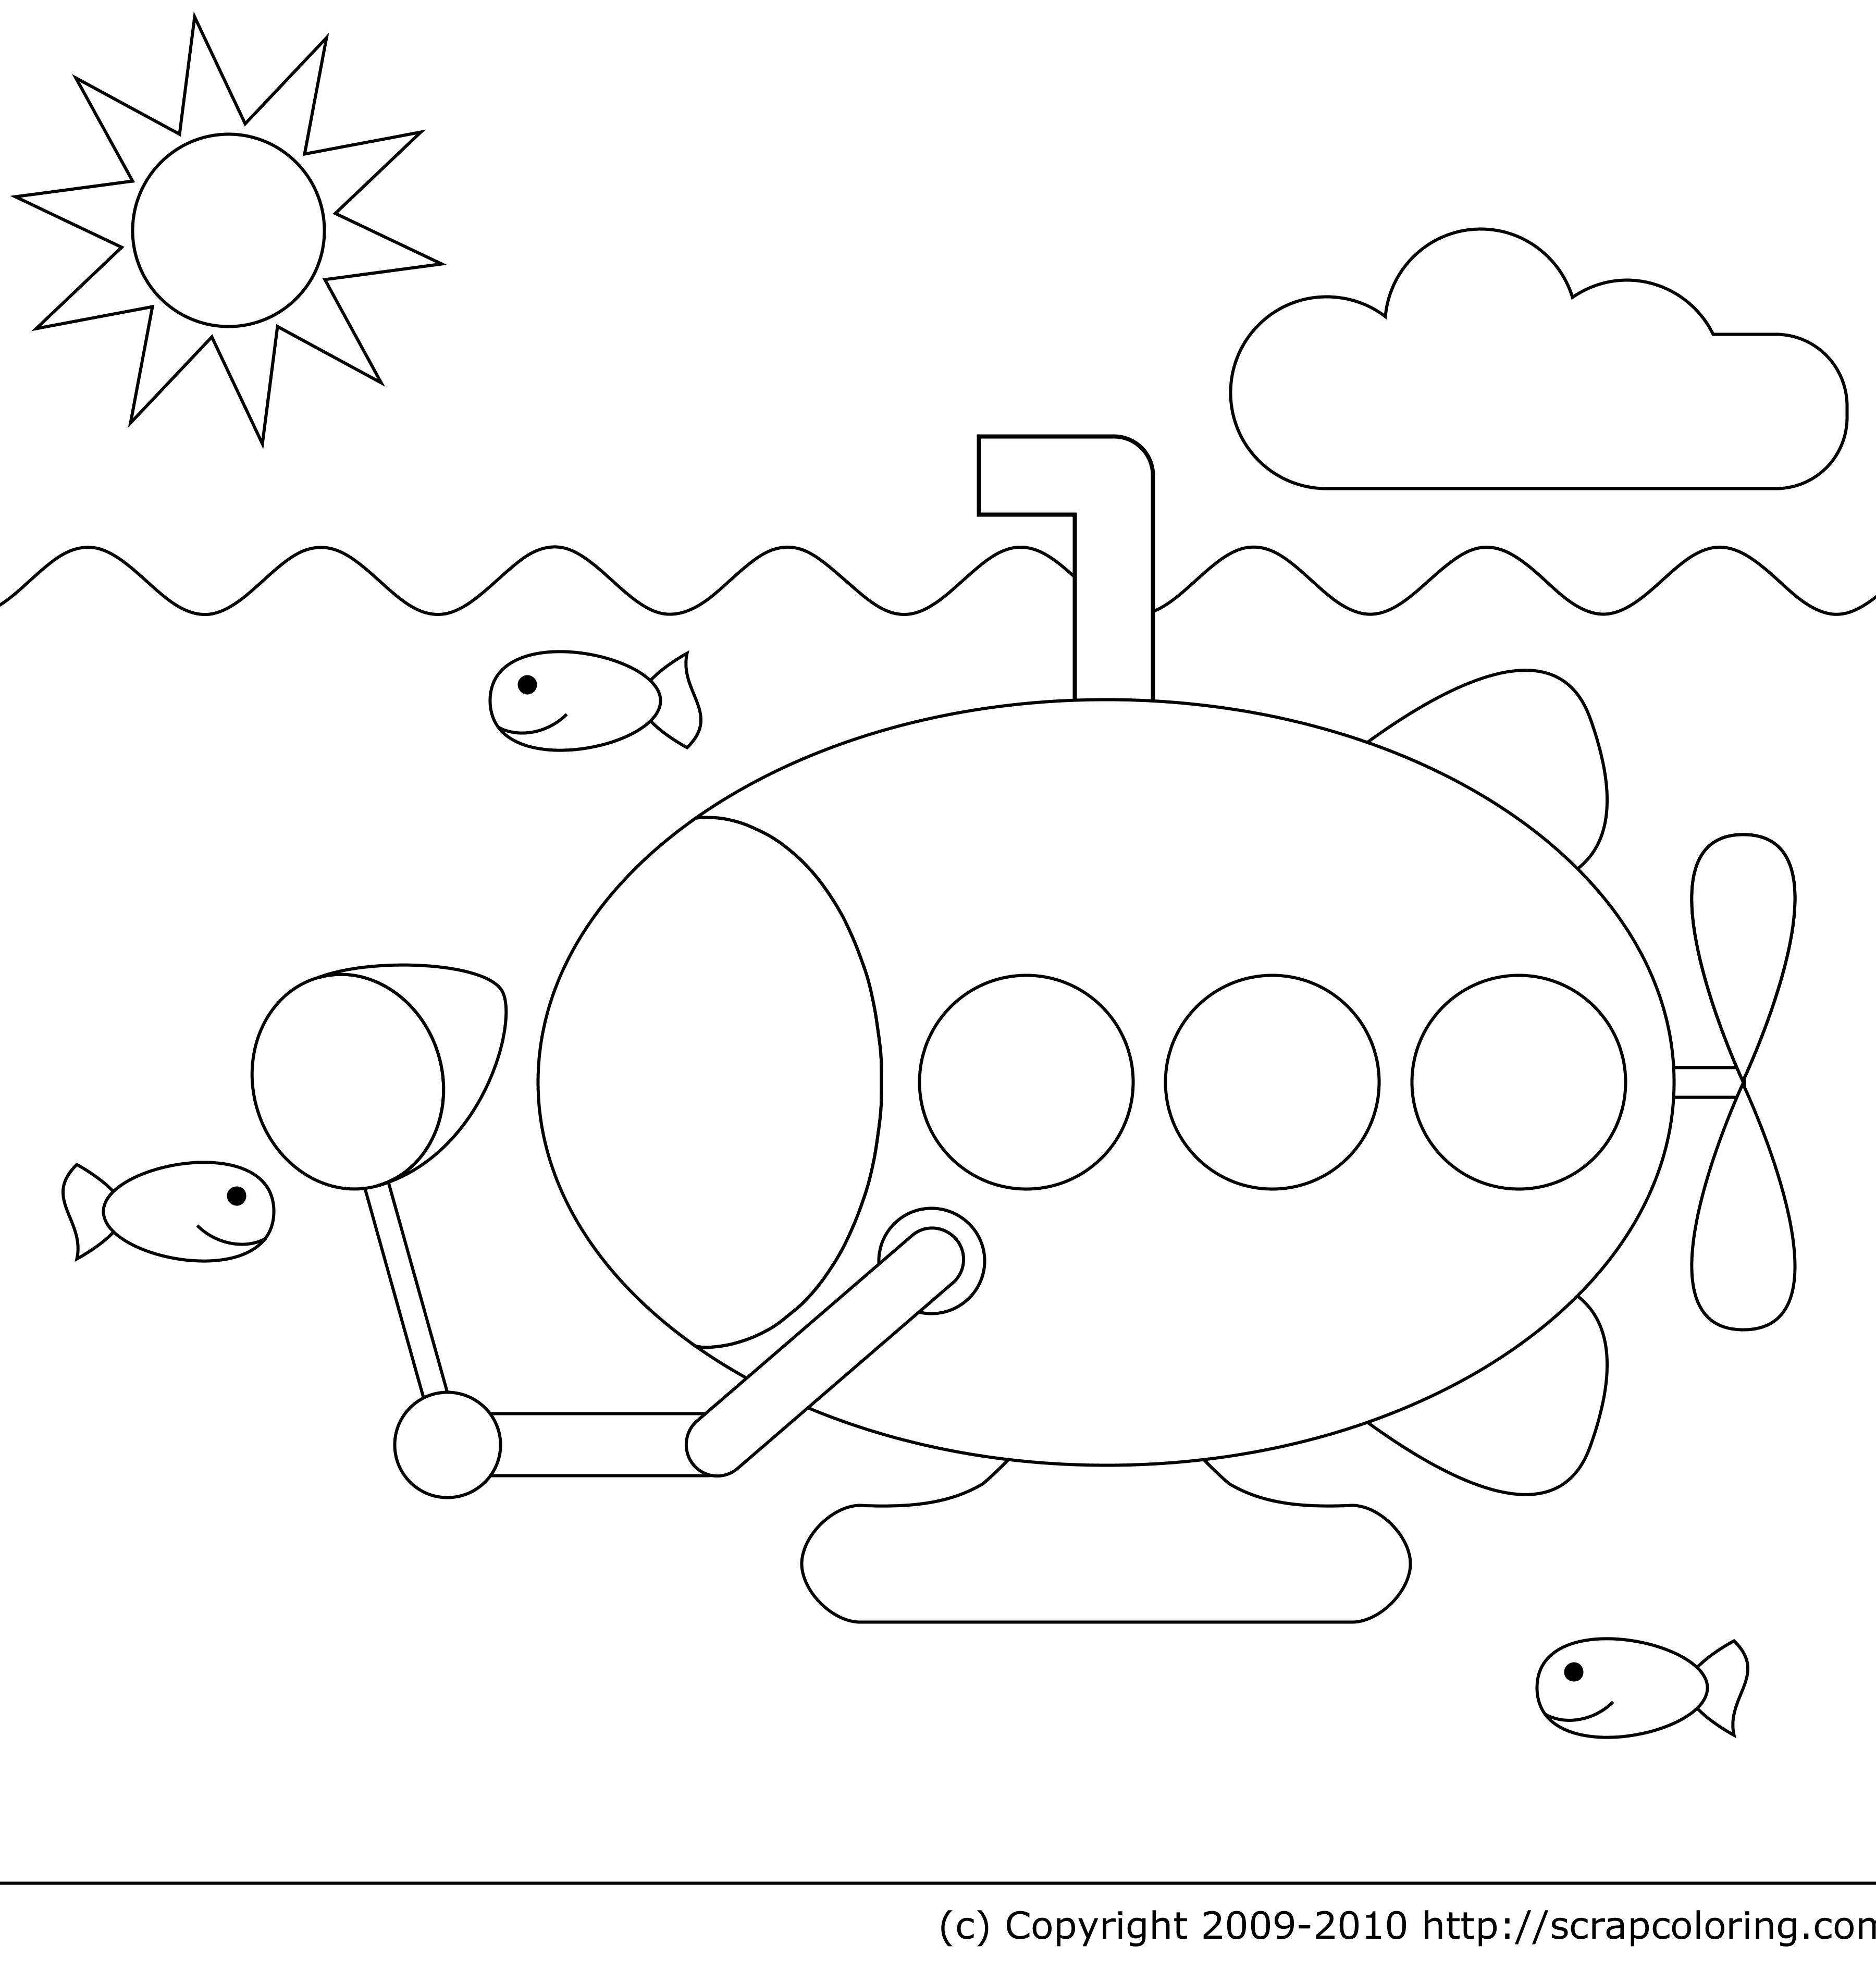  Submarine Coloring pages | kids coloring pages | Coloring pages for kids | #1